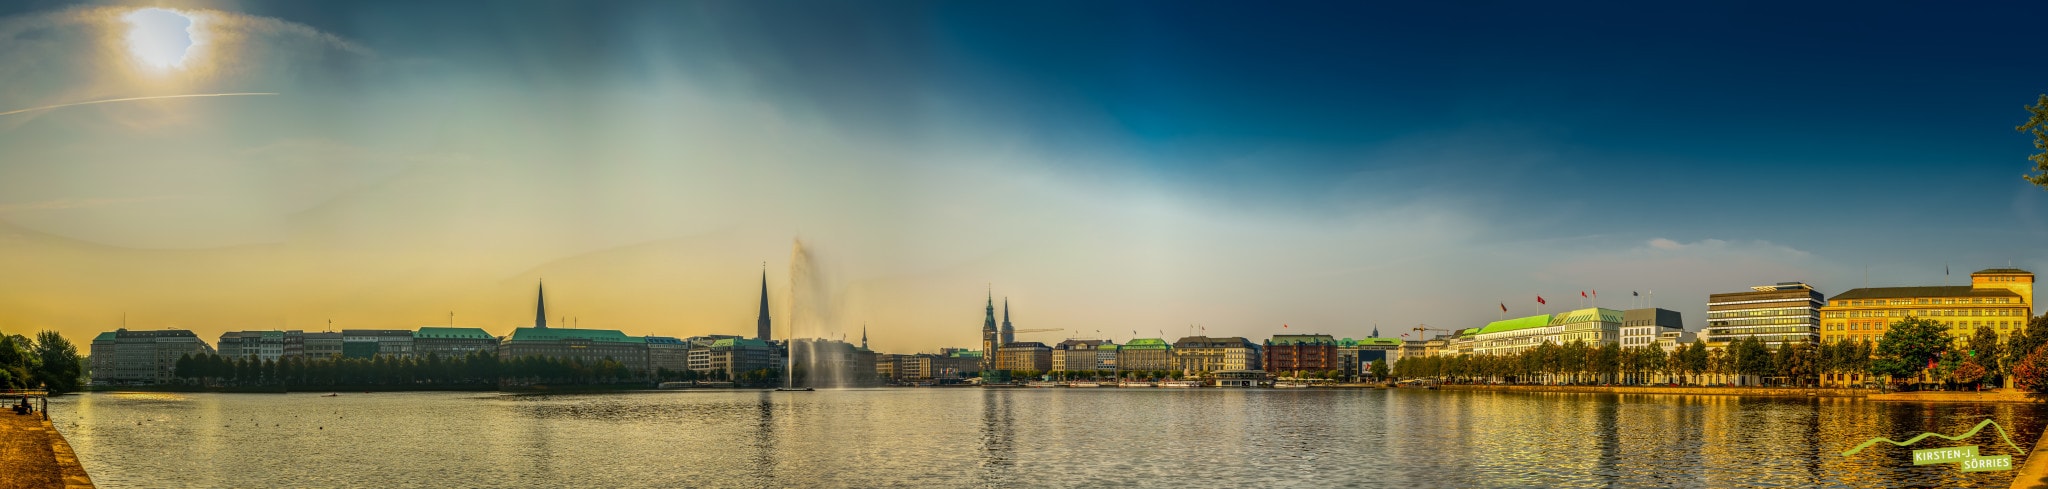 Alster-Panorama